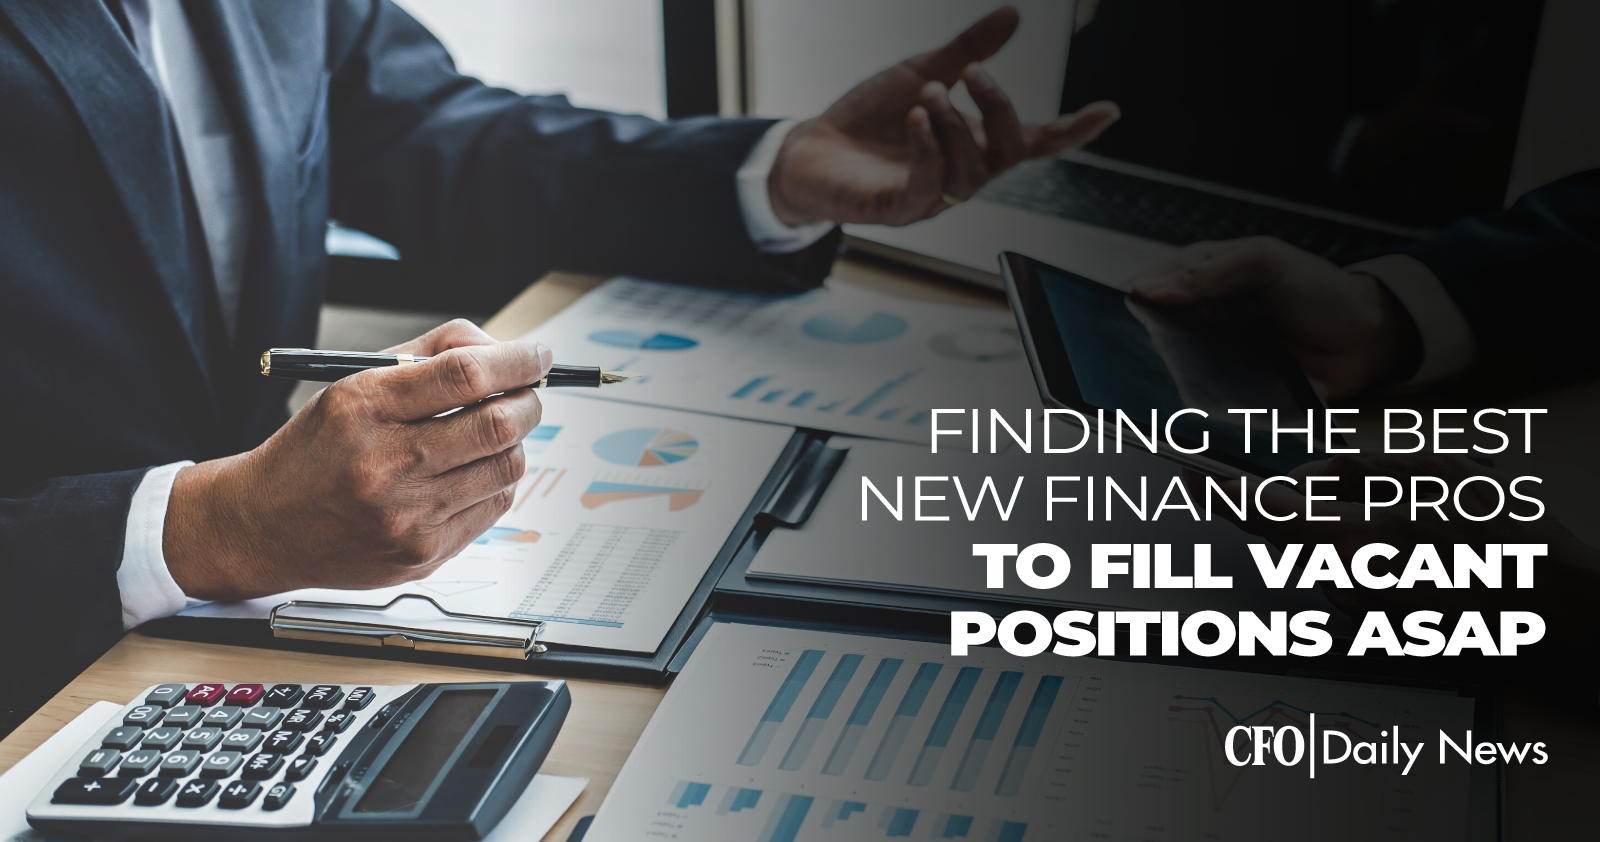 Finding The Best New Finance Pros To Fill Vacant Positions ASAP